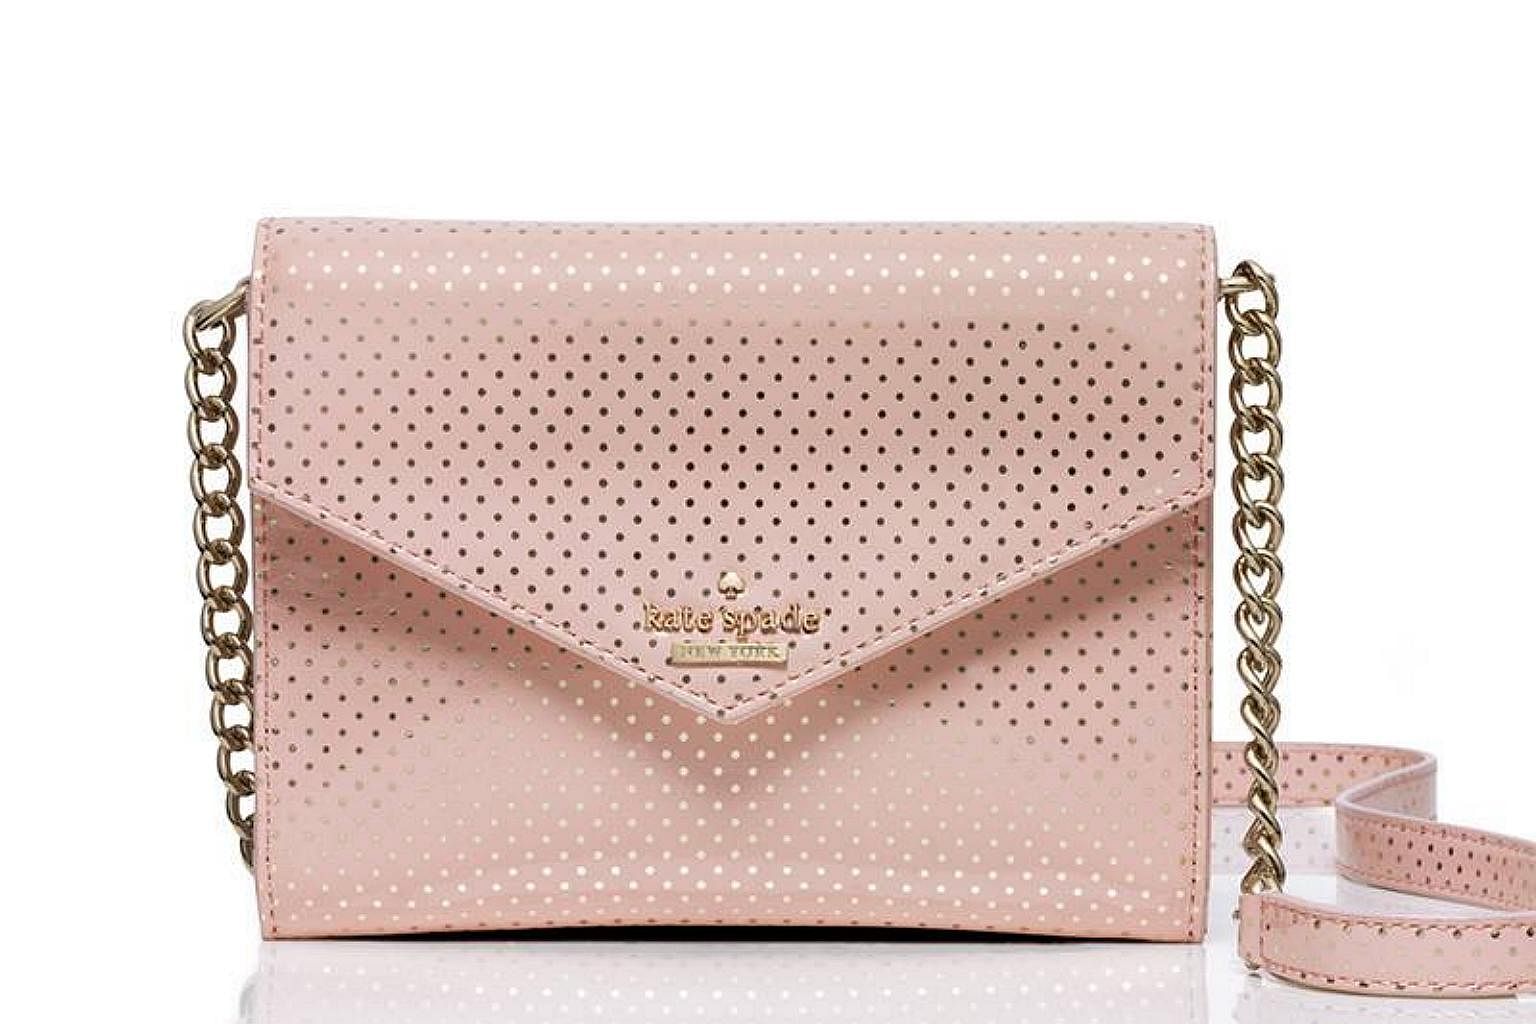 The Kate Spade Dakota Bag Is A Contemporary Expression Of Duality - ELLE  SINGAPORE